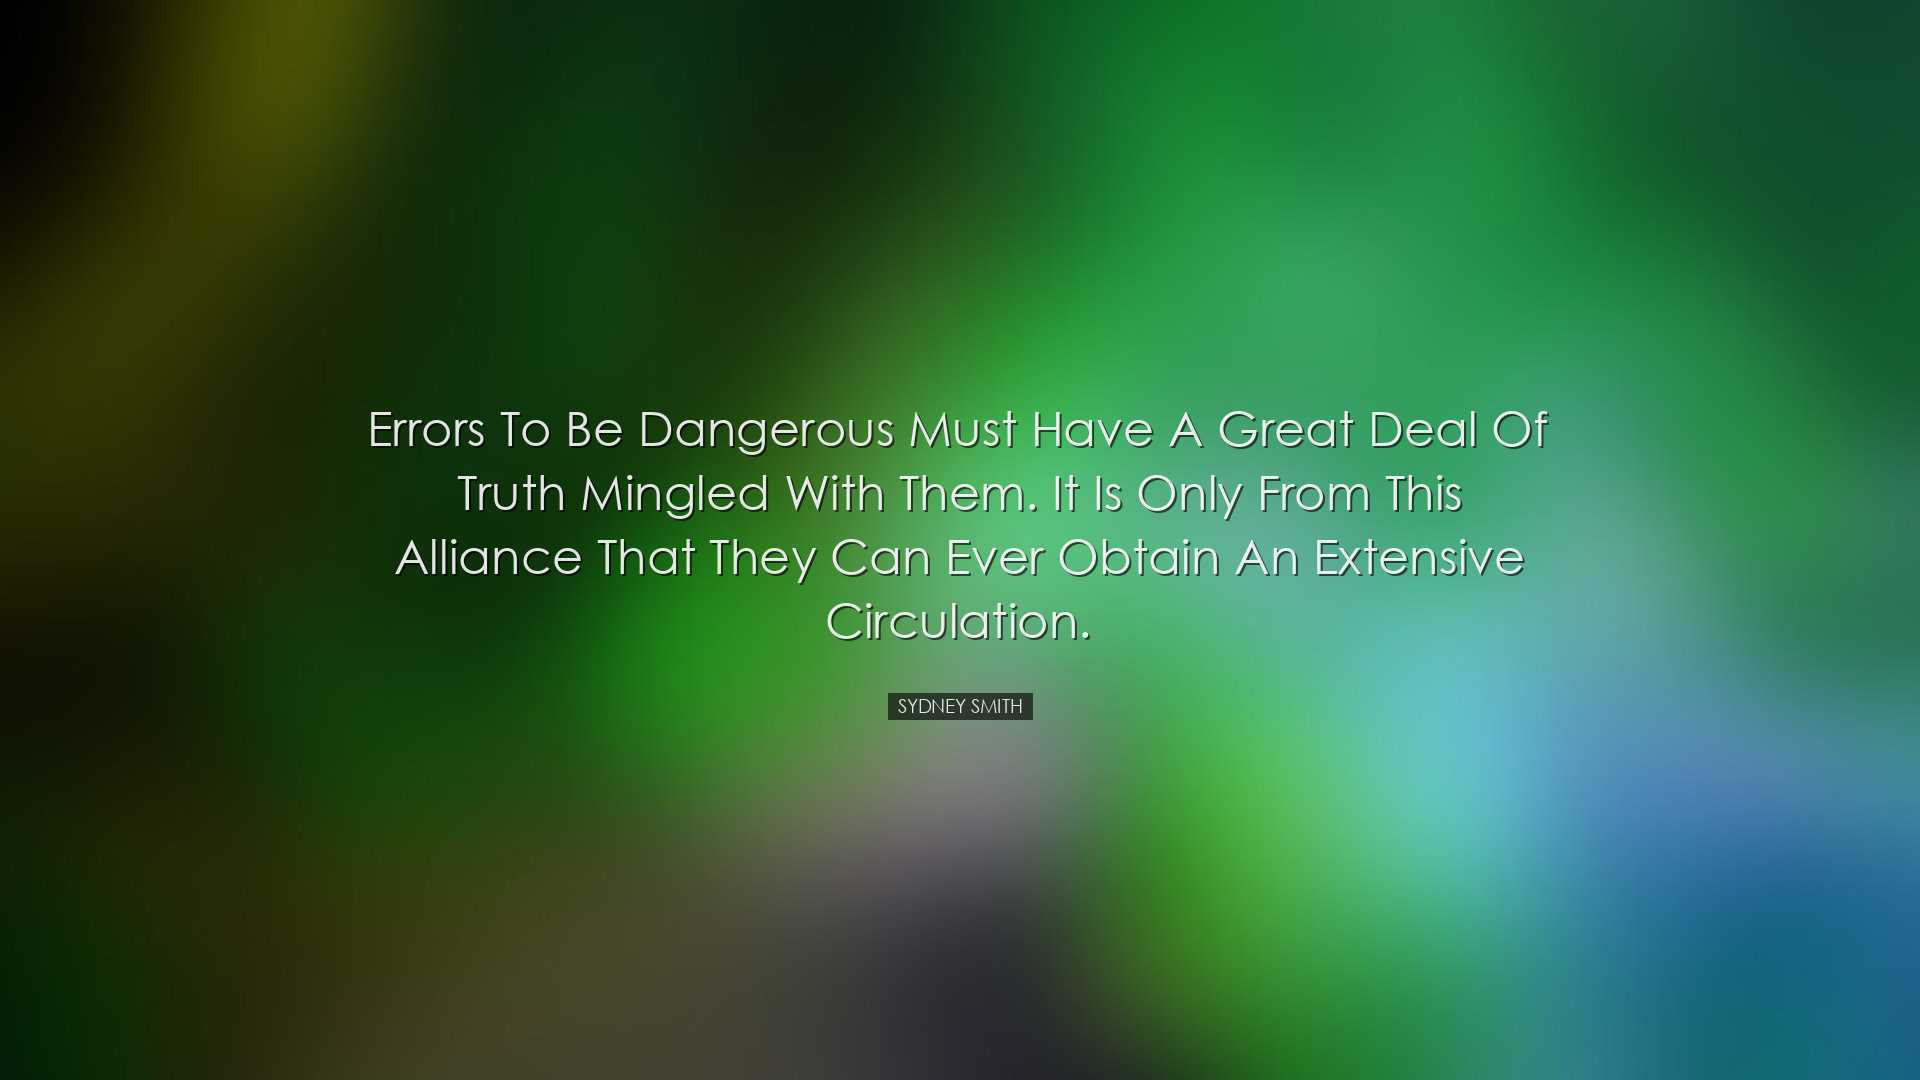 Errors to be dangerous must have a great deal of truth mingled wit